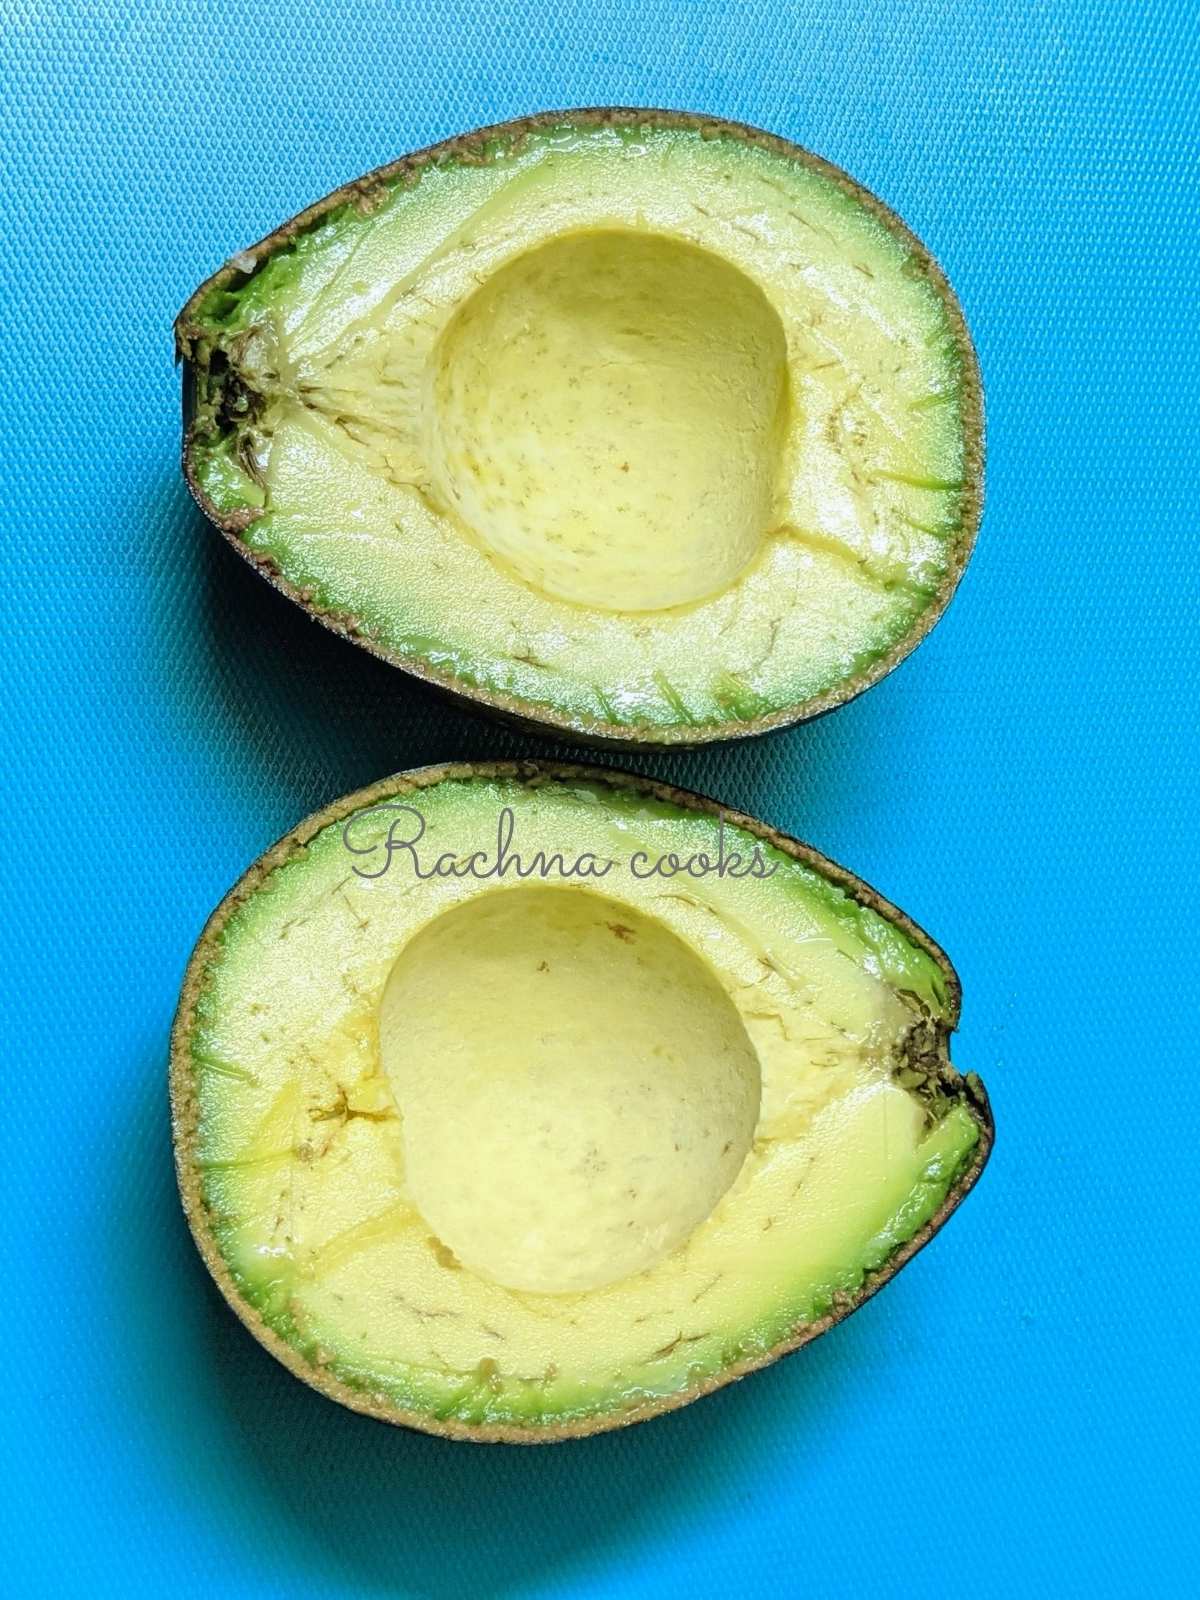 An avocado cut into half with pit removed